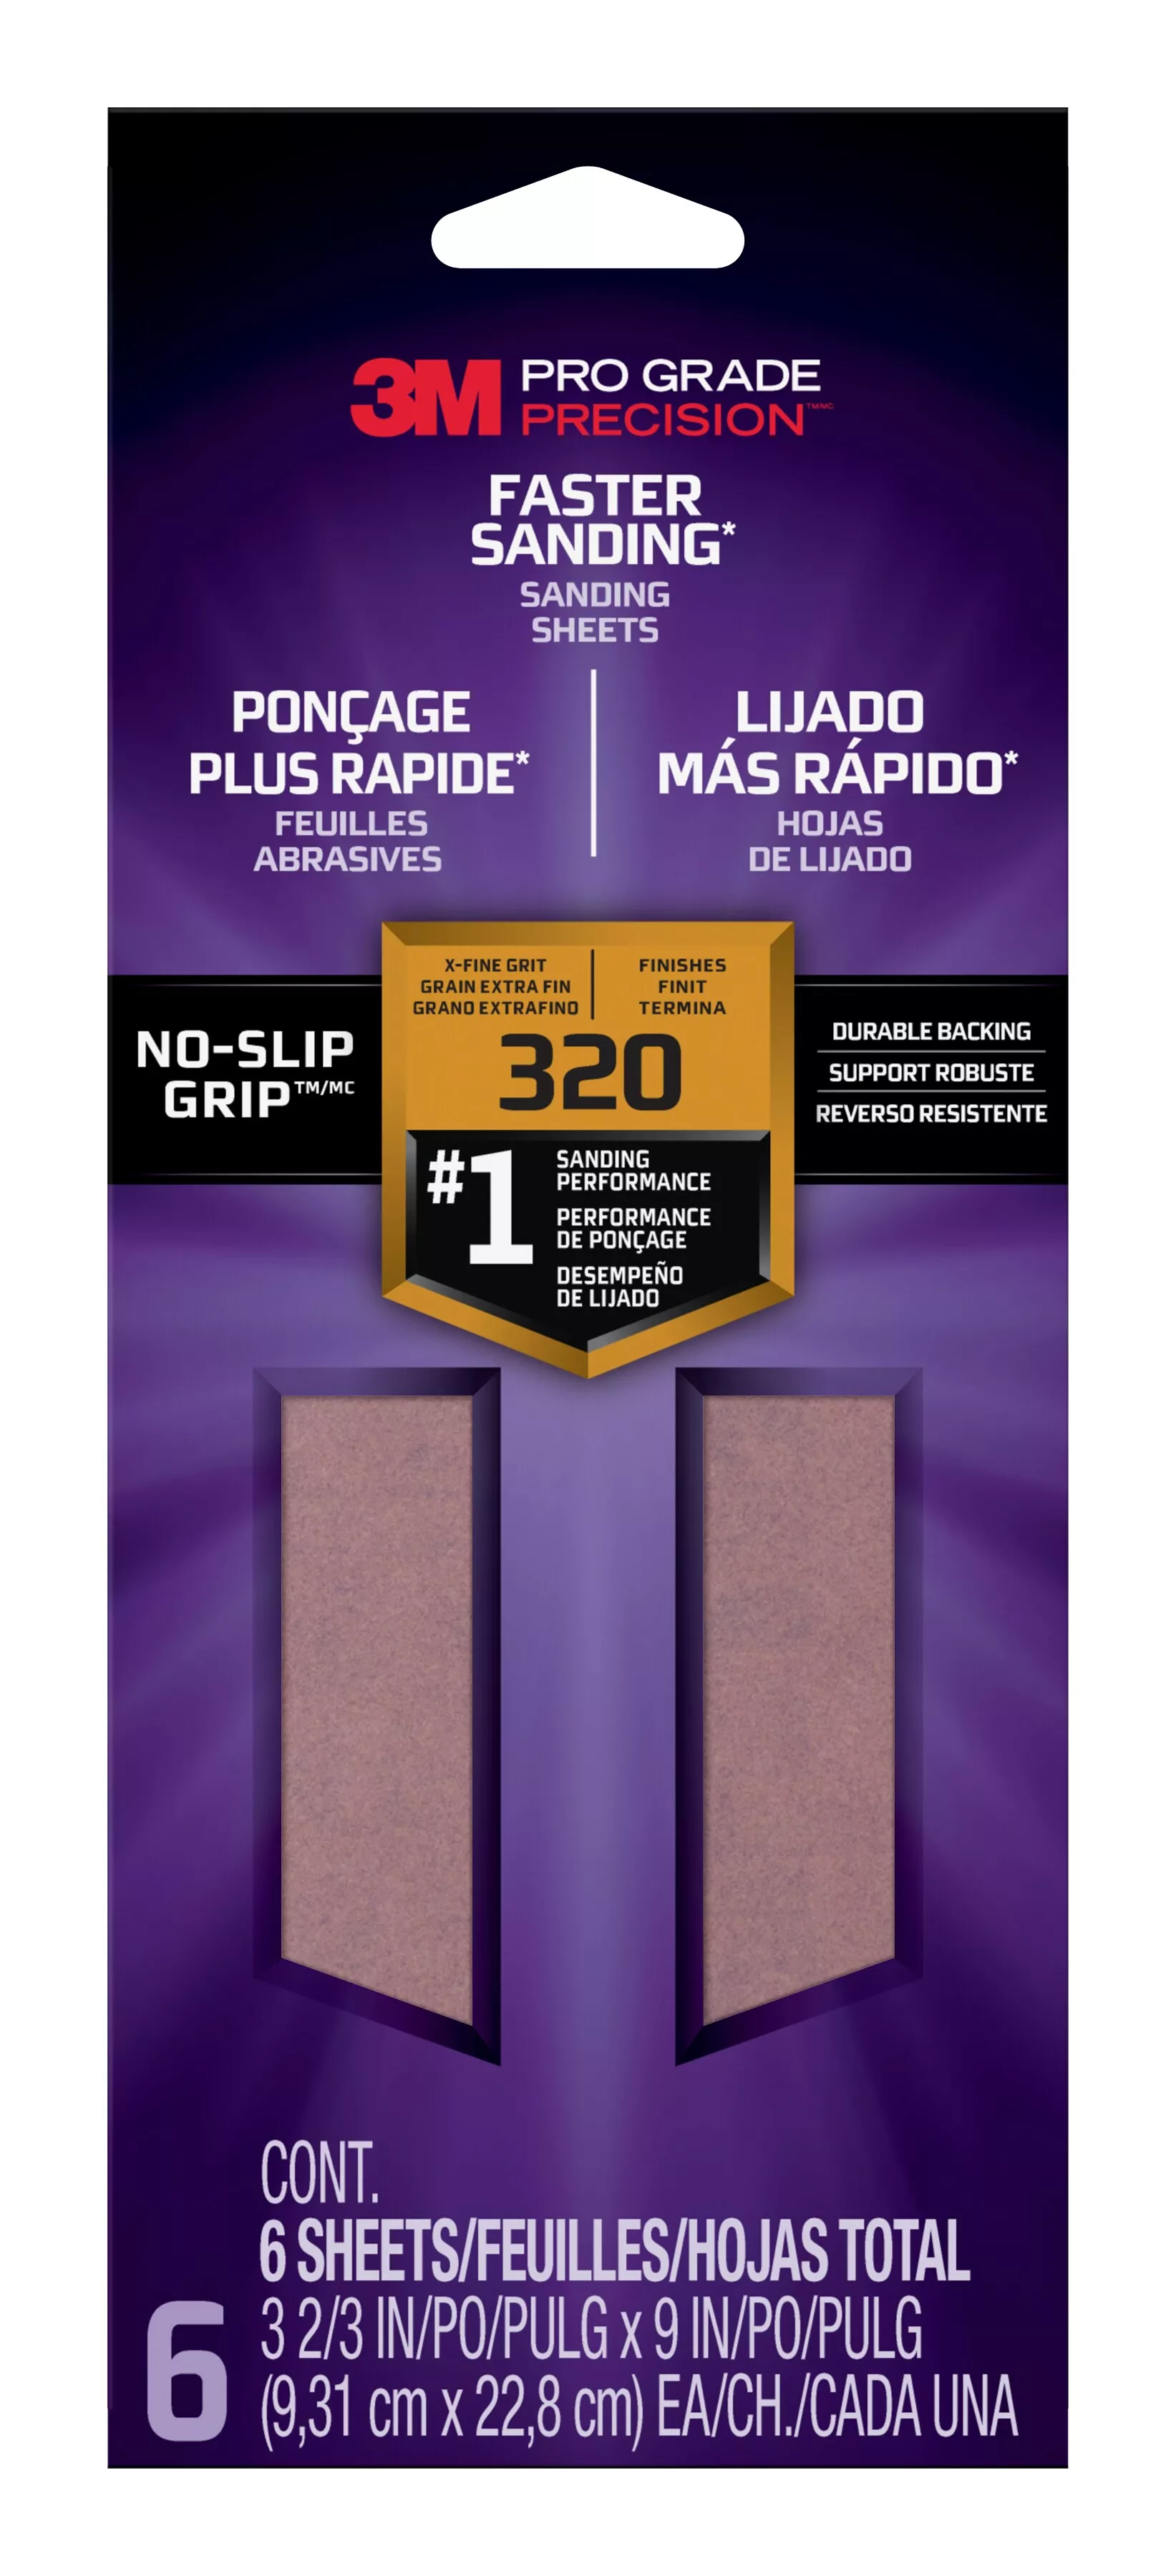 3M™ Pro Grade Precision™ Faster Sanding Sanding Sheets 320 grit Extra
Fine, 127320TRI-6, 3-2/3 in x 9 in, 6/pk